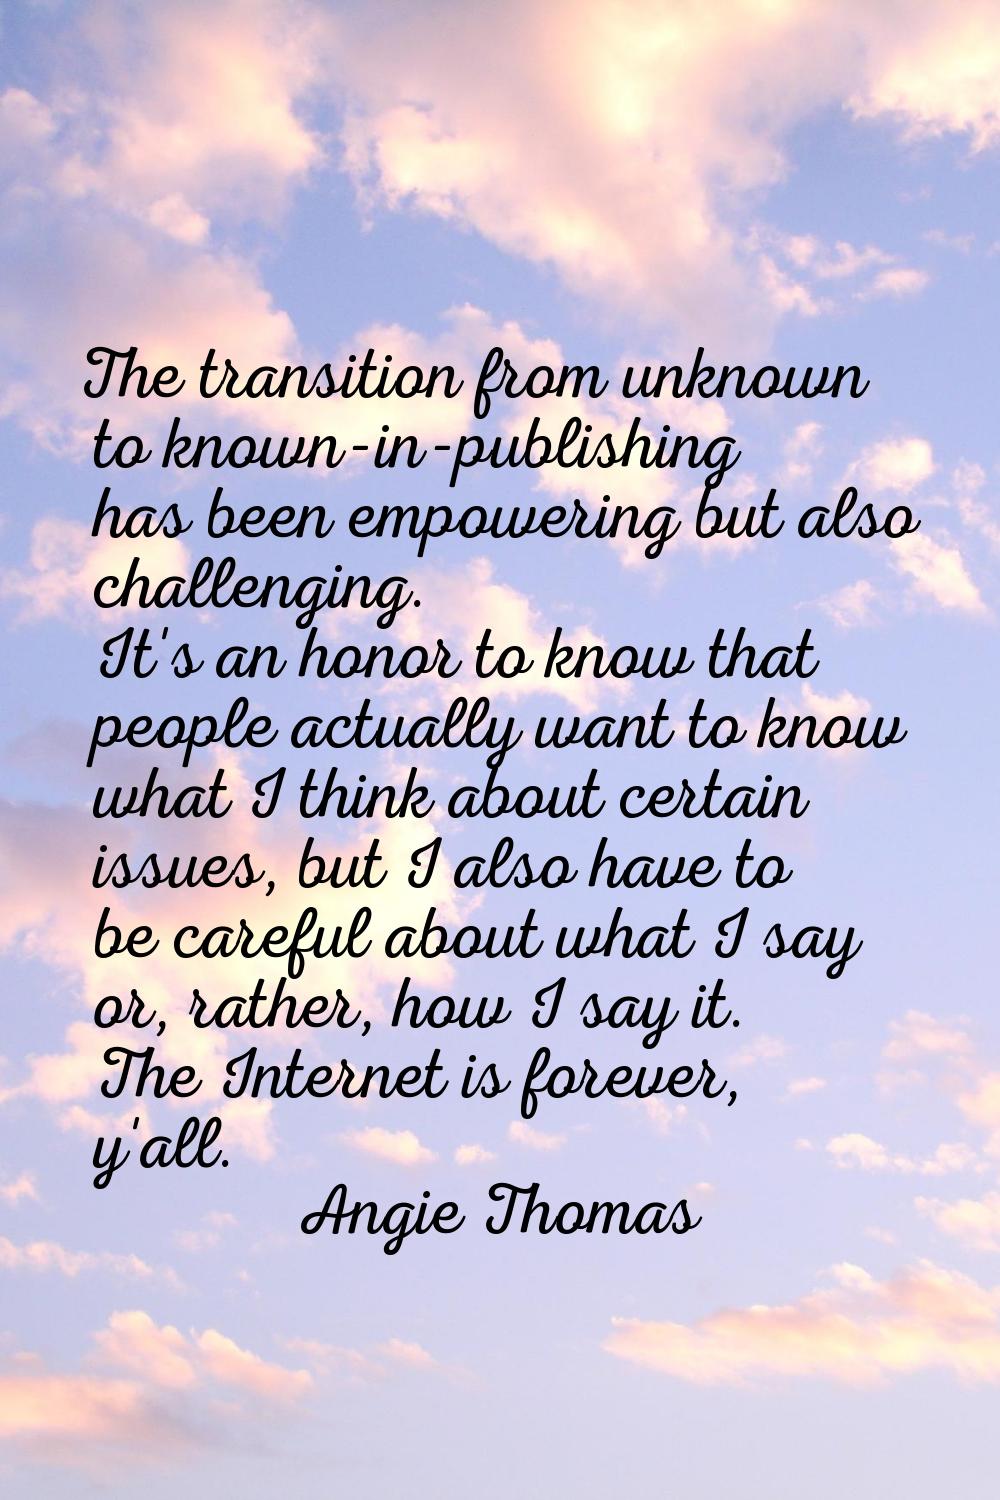 The transition from unknown to known-in-publishing has been empowering but also challenging. It's a